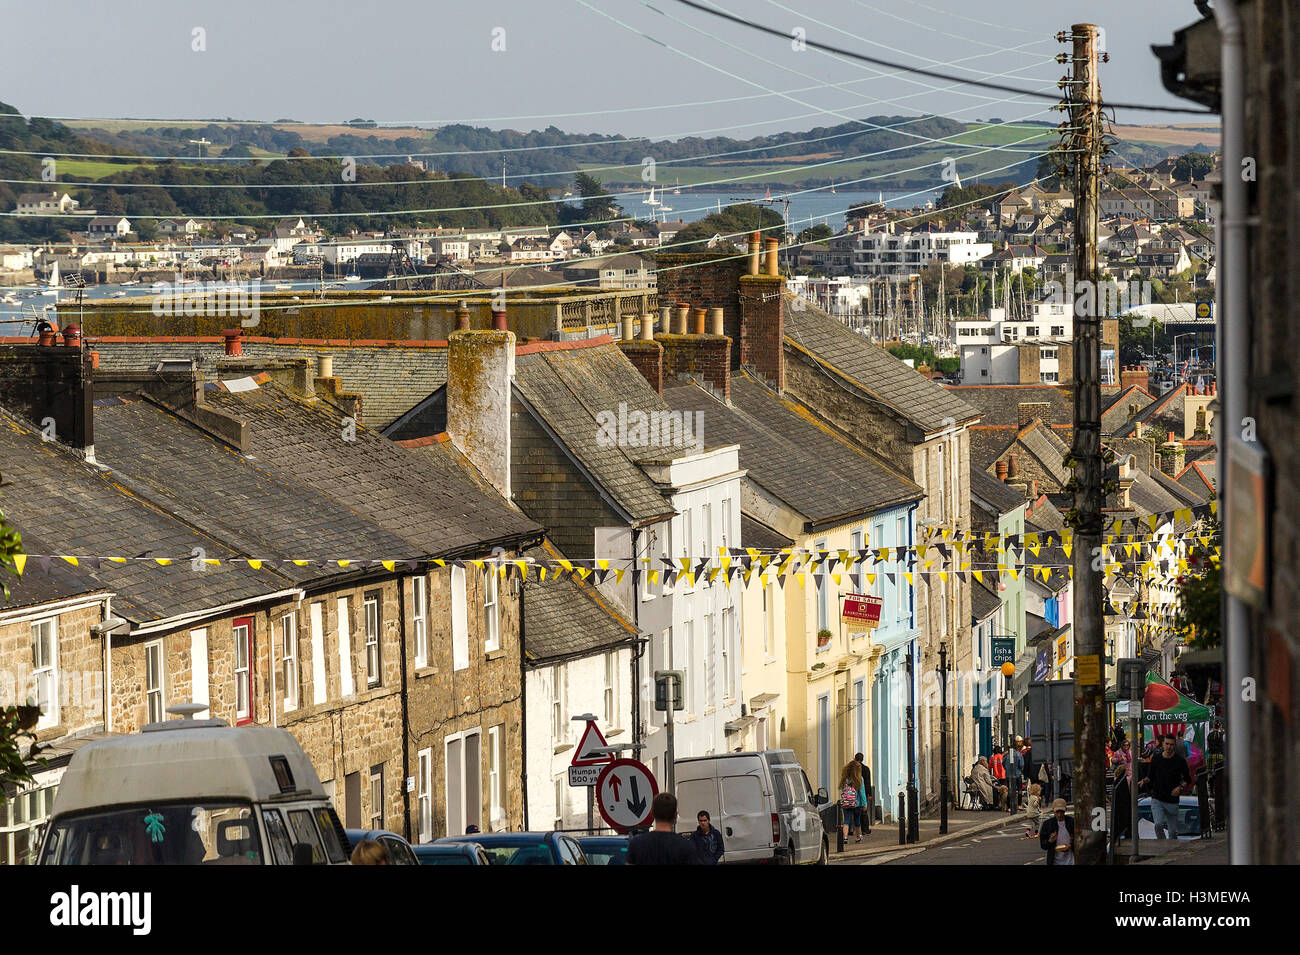 The River Fal seen over the rooftops of buildings in Penryn, Cornwall. Stock Photo